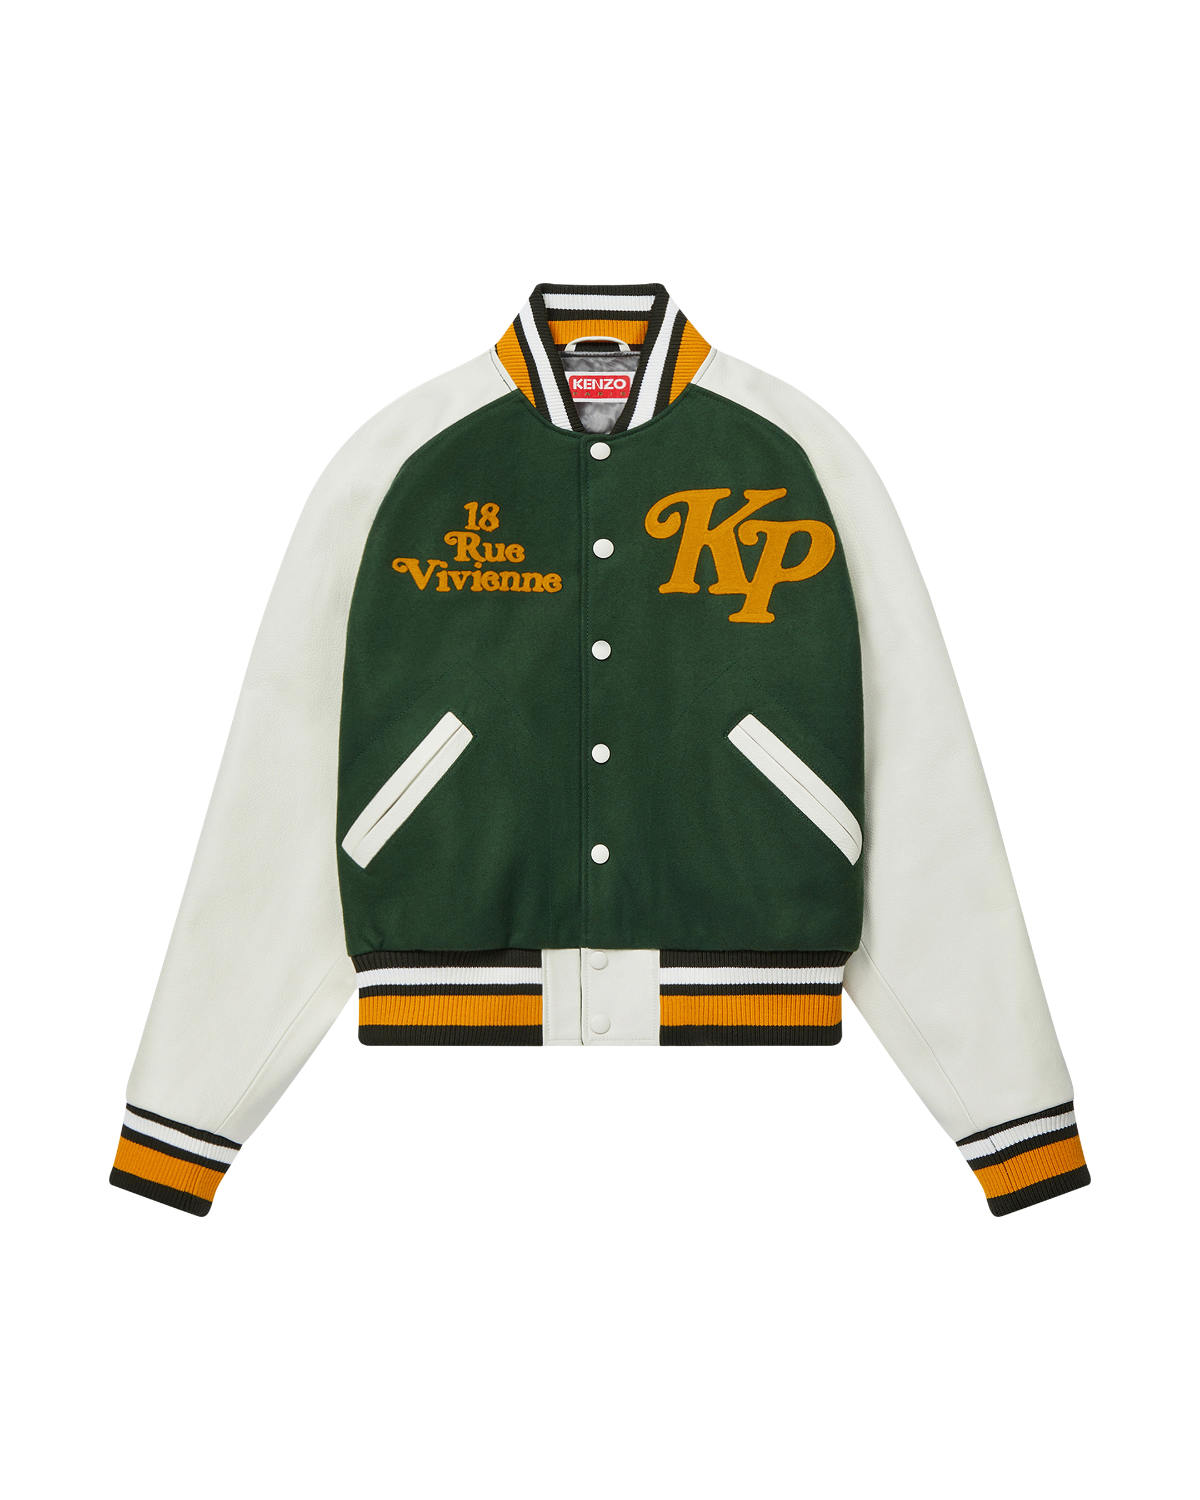 The Kenzo X Verdy Collection